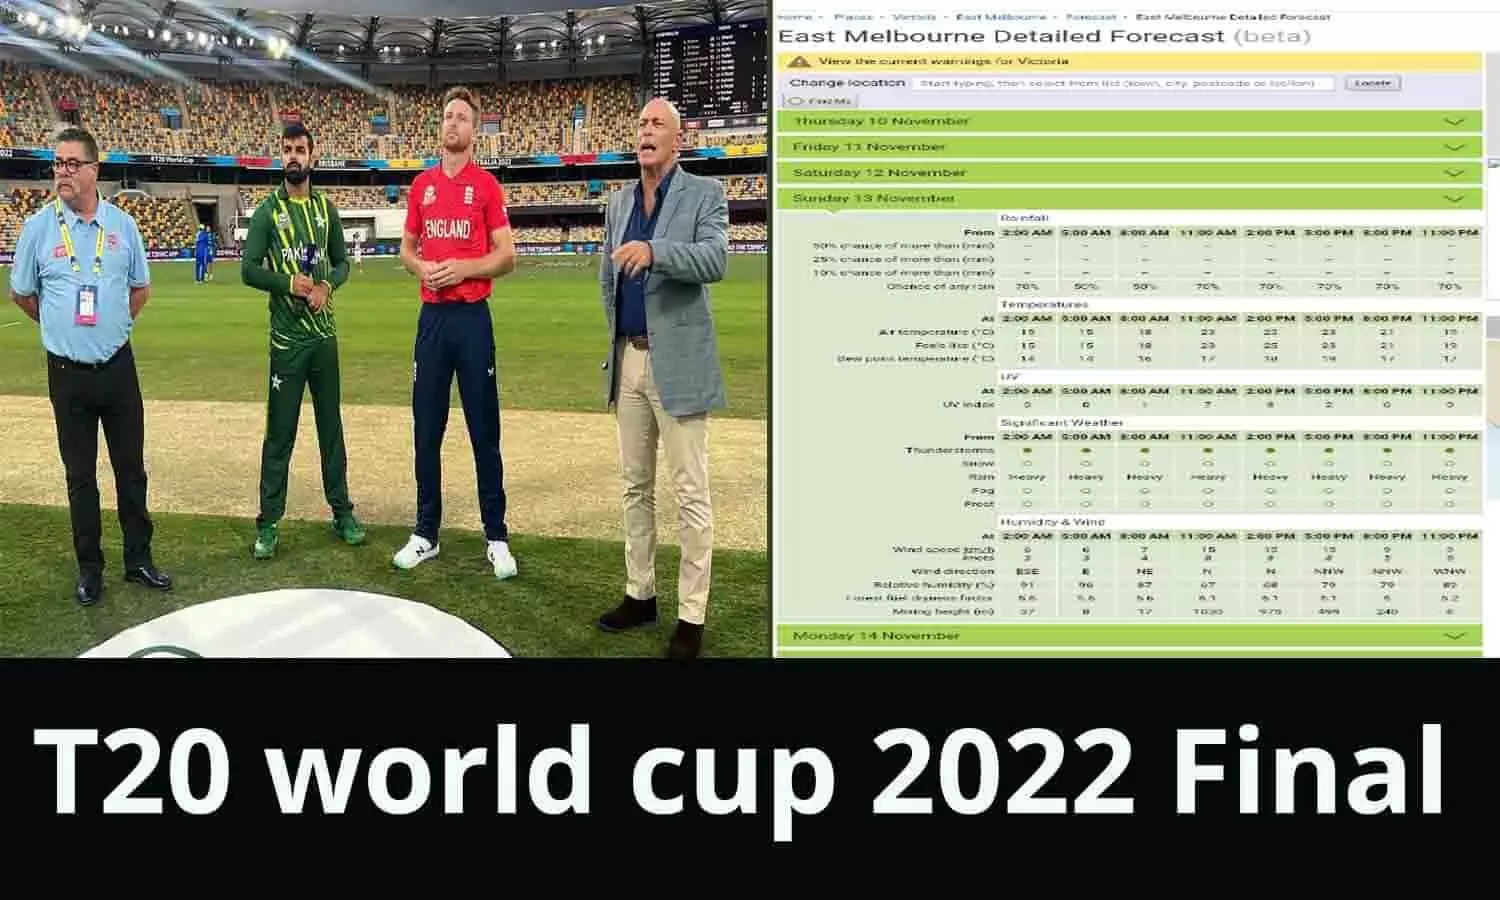 T20 world cup 2022 Final